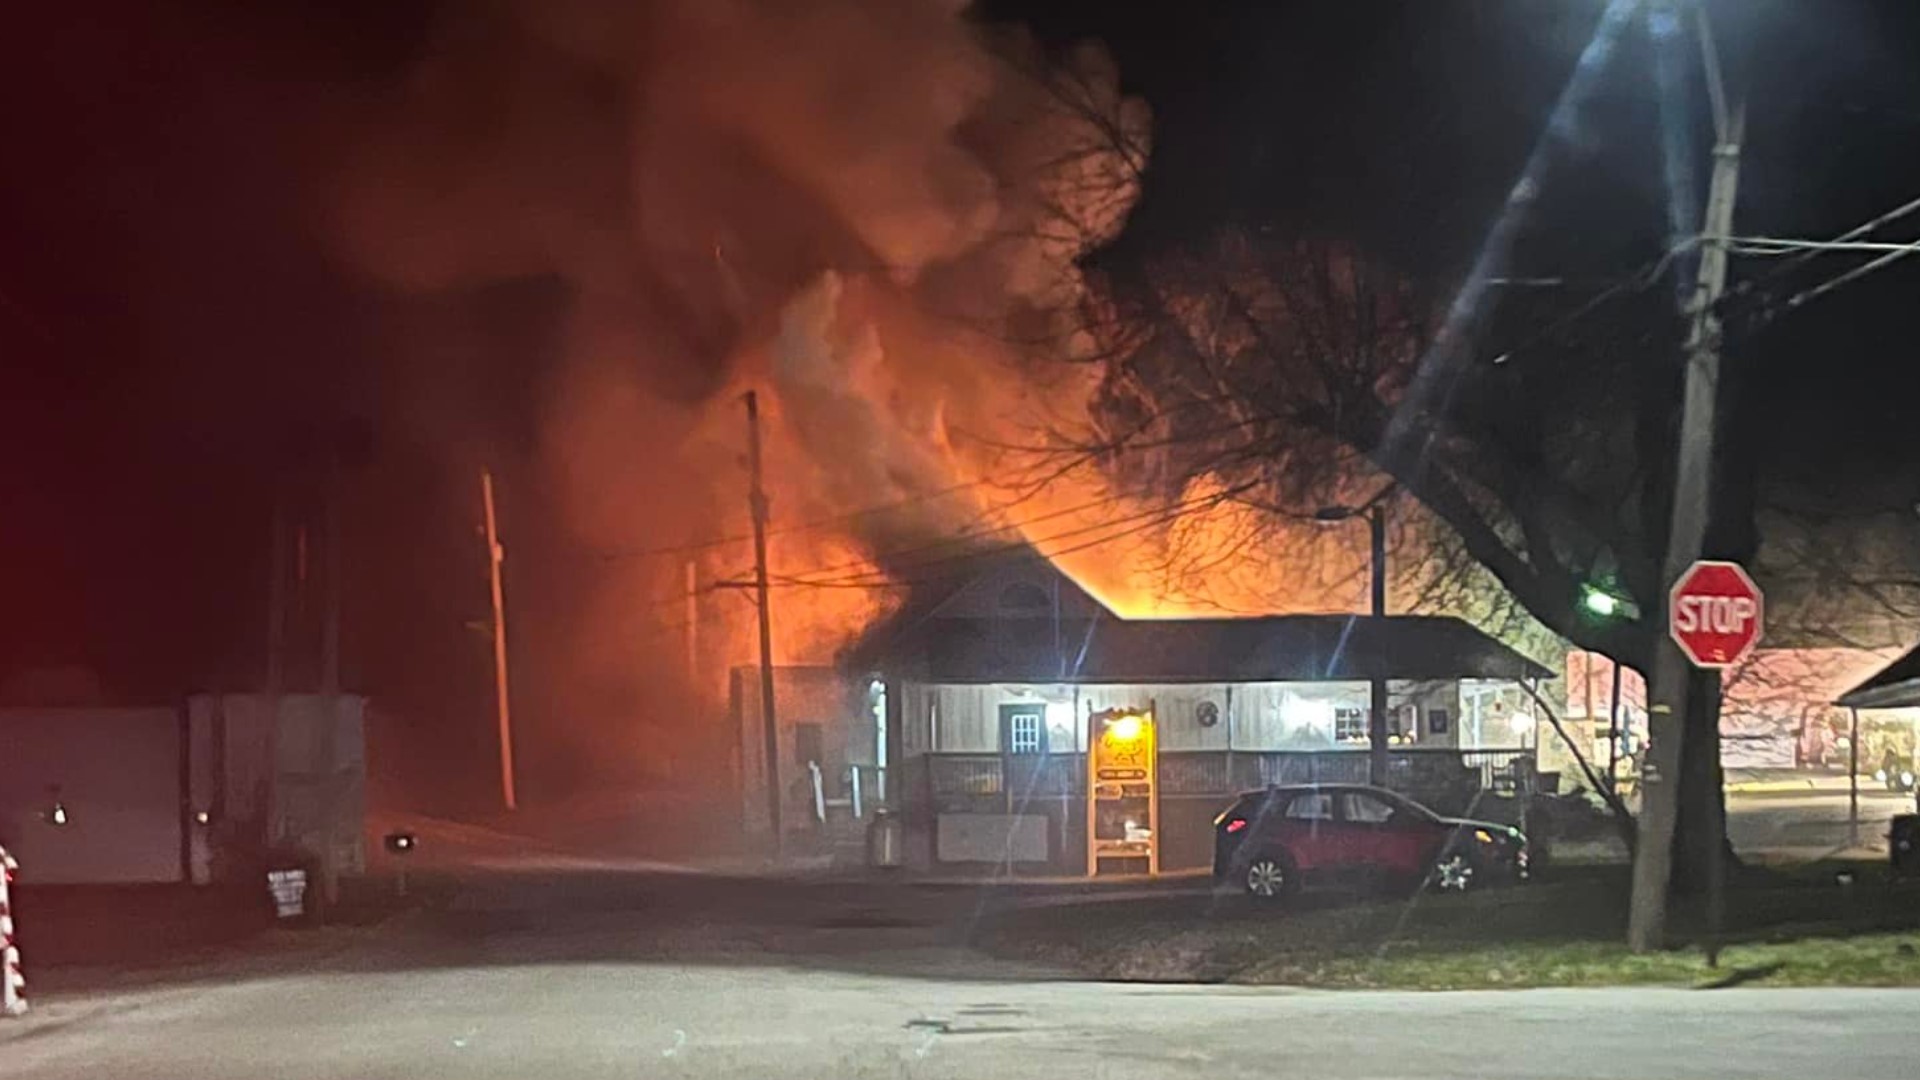 York County 911 Dispatch says they received the call about the fire around 8:15 p.m. Tuesday night.